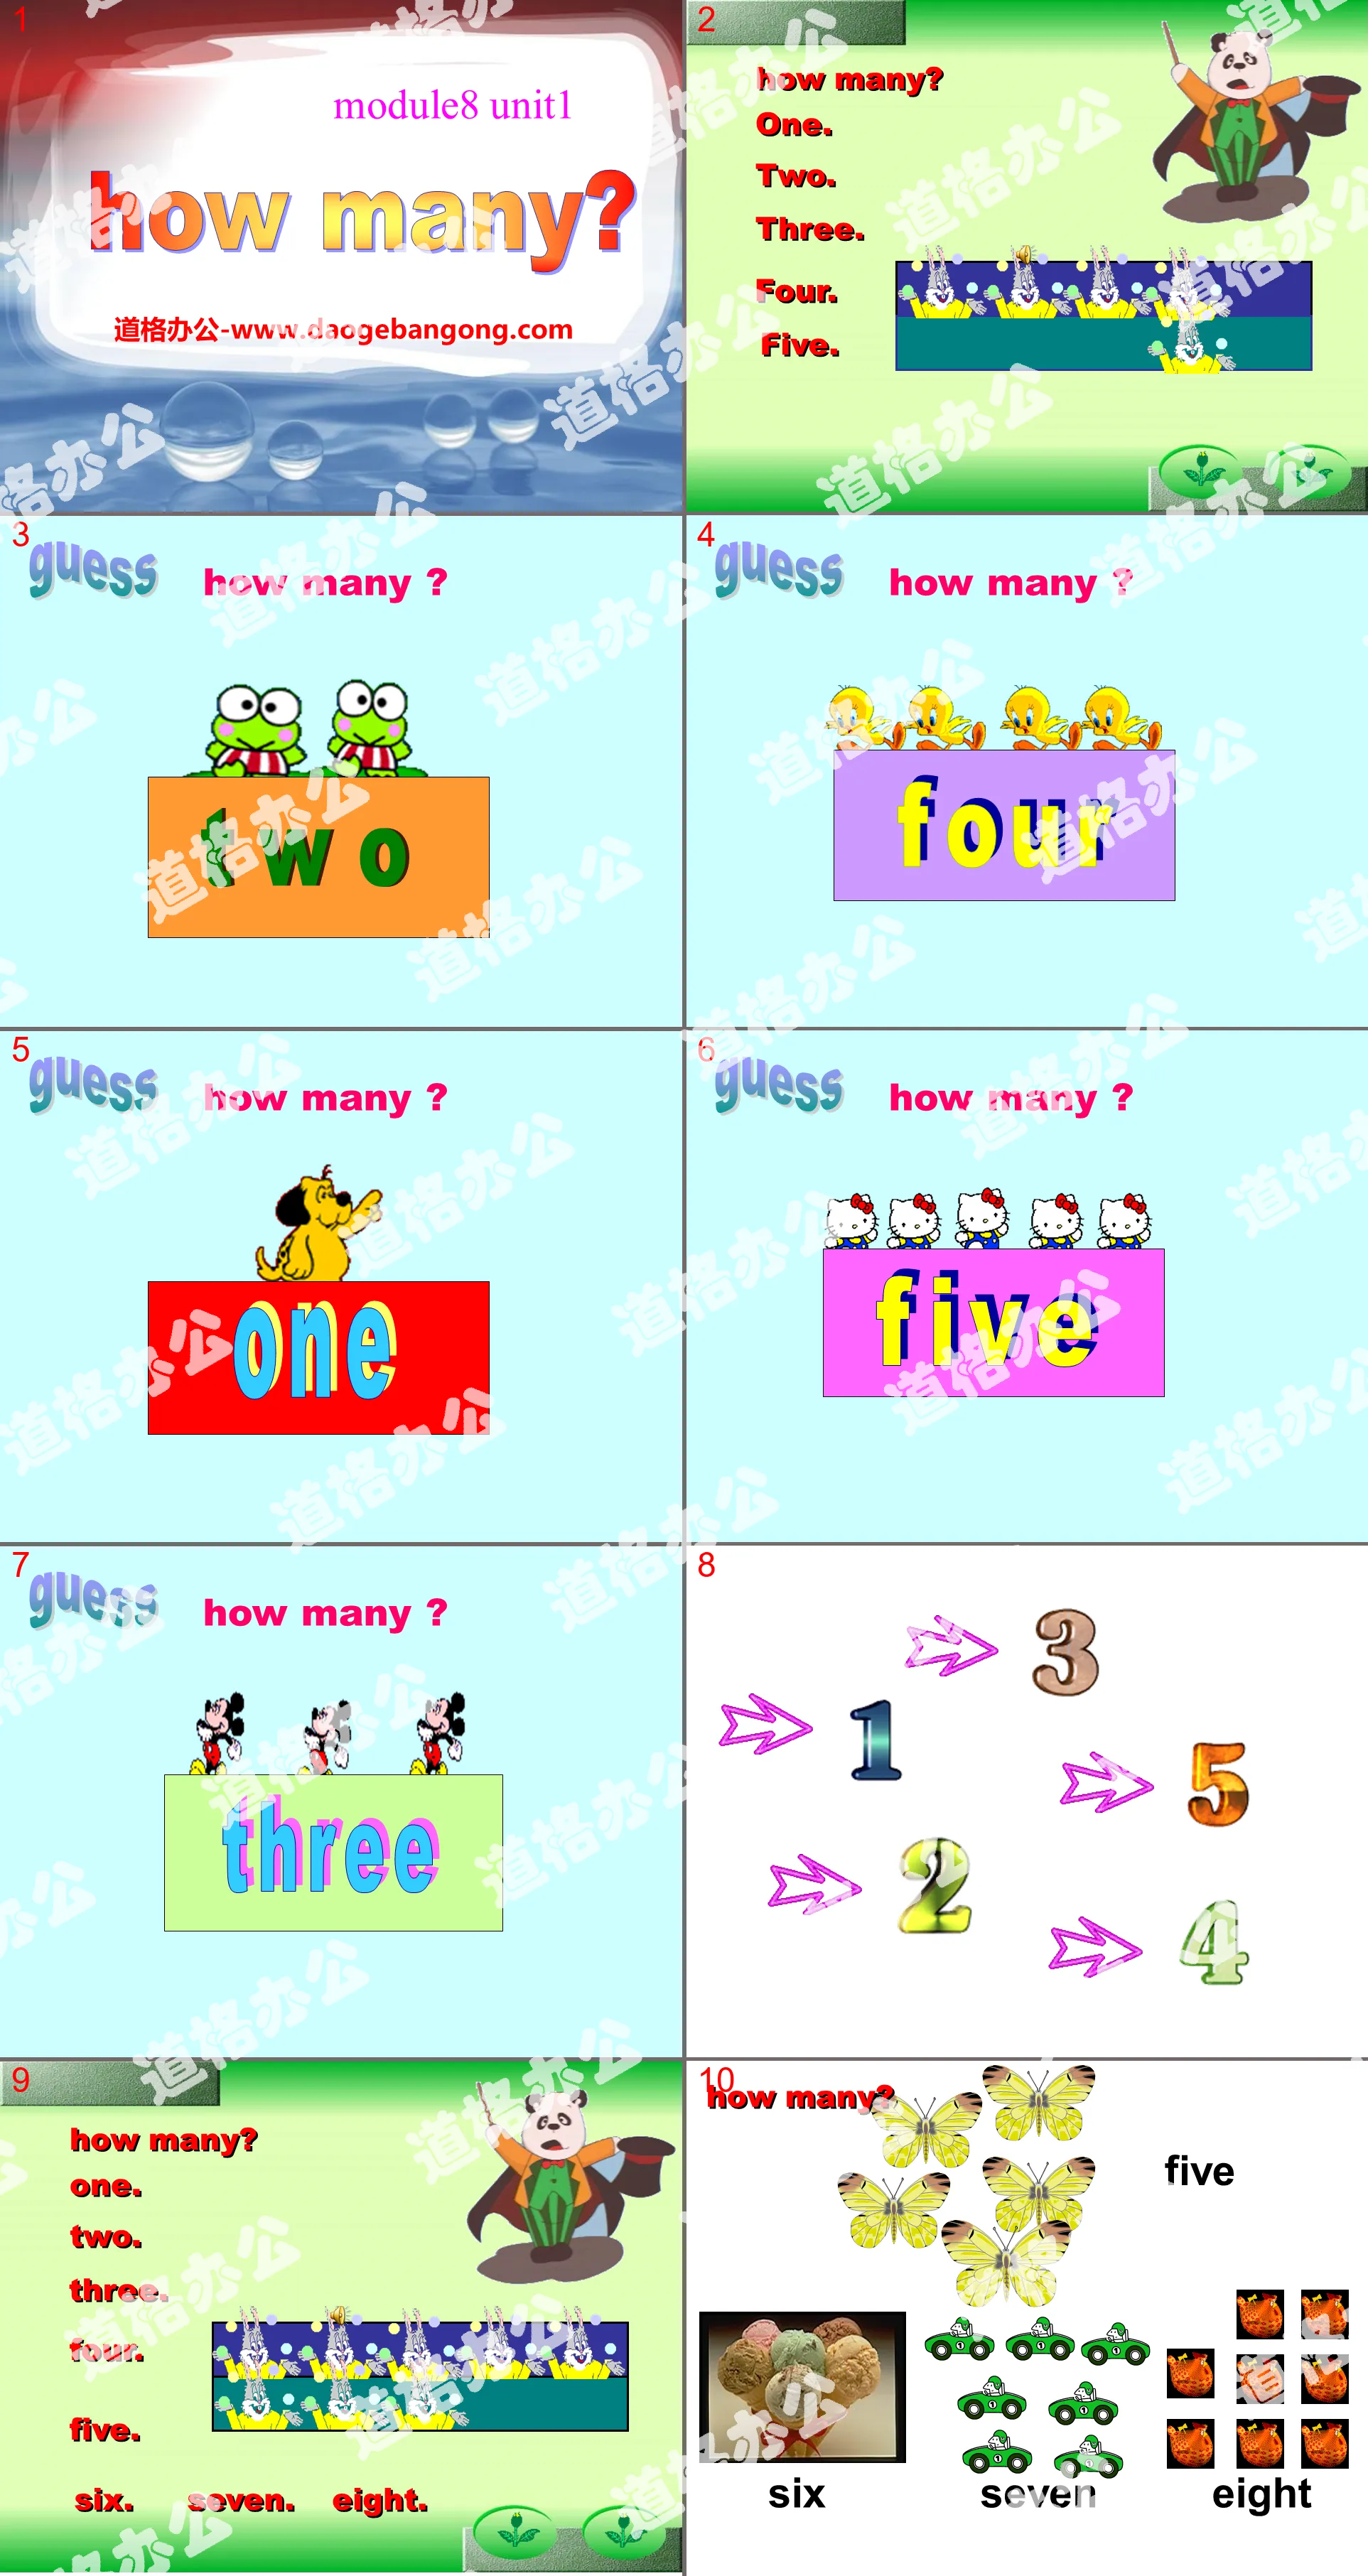 "How many?" PPT courseware 3